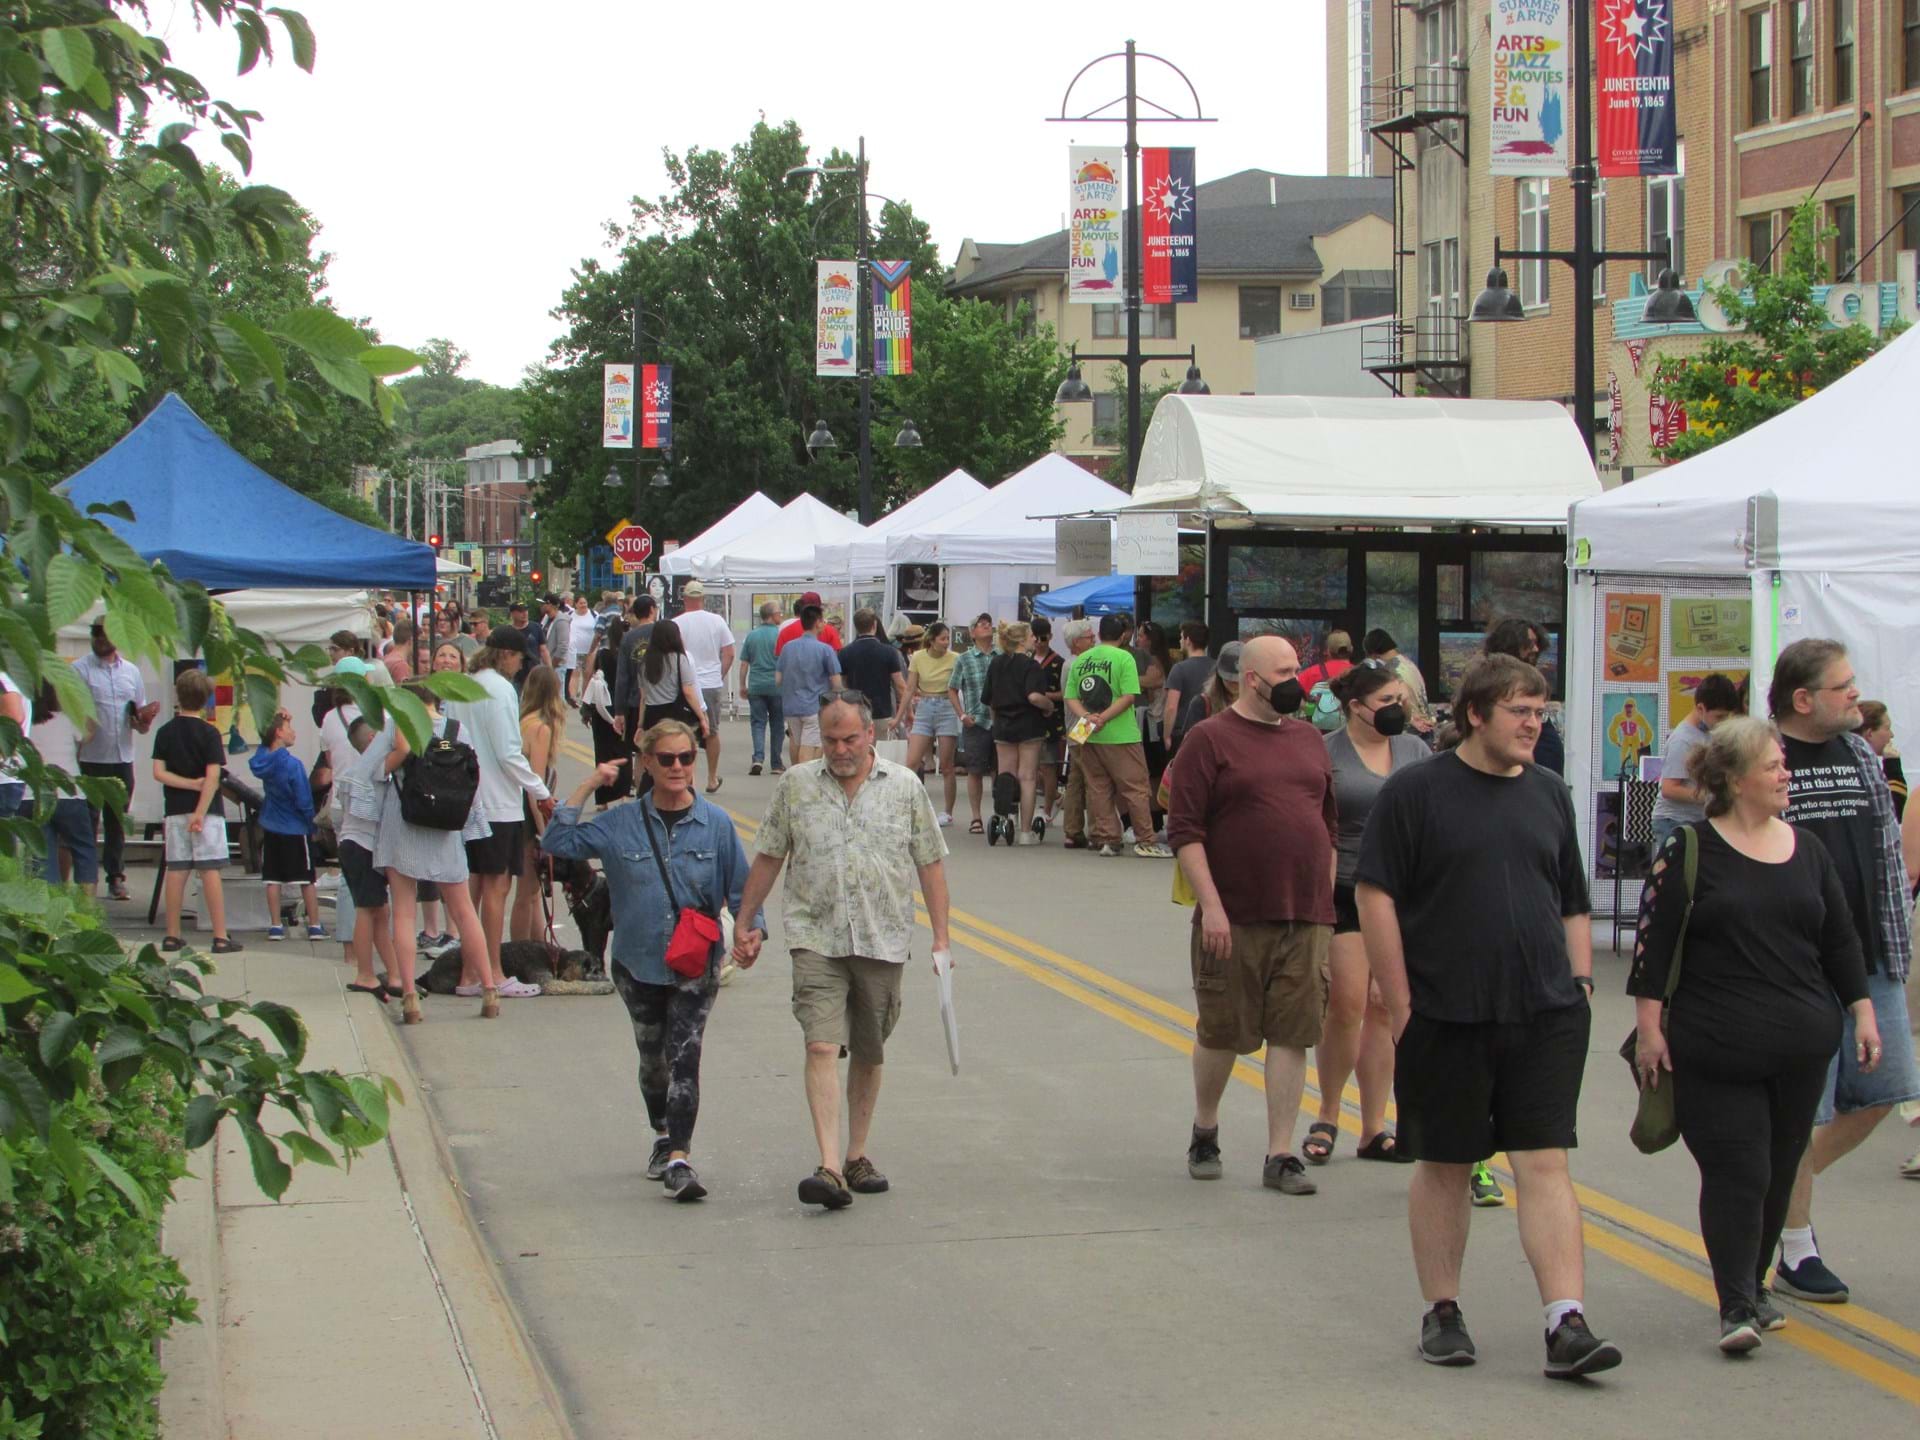 Artists booths at the Iowa Arts Festival